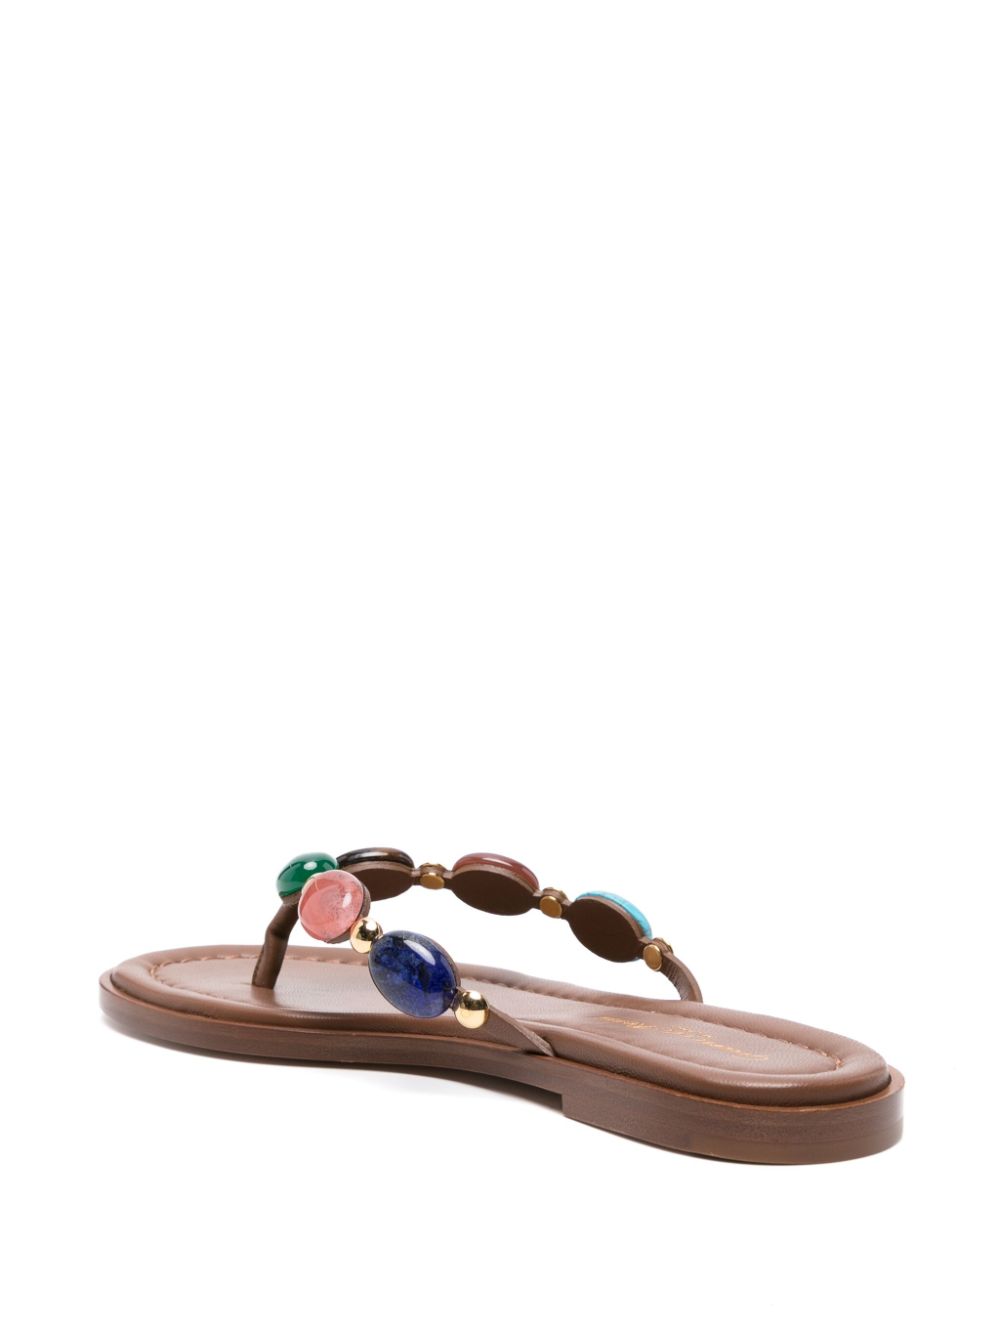 Gianvito Rossi Sandals Leather Brown